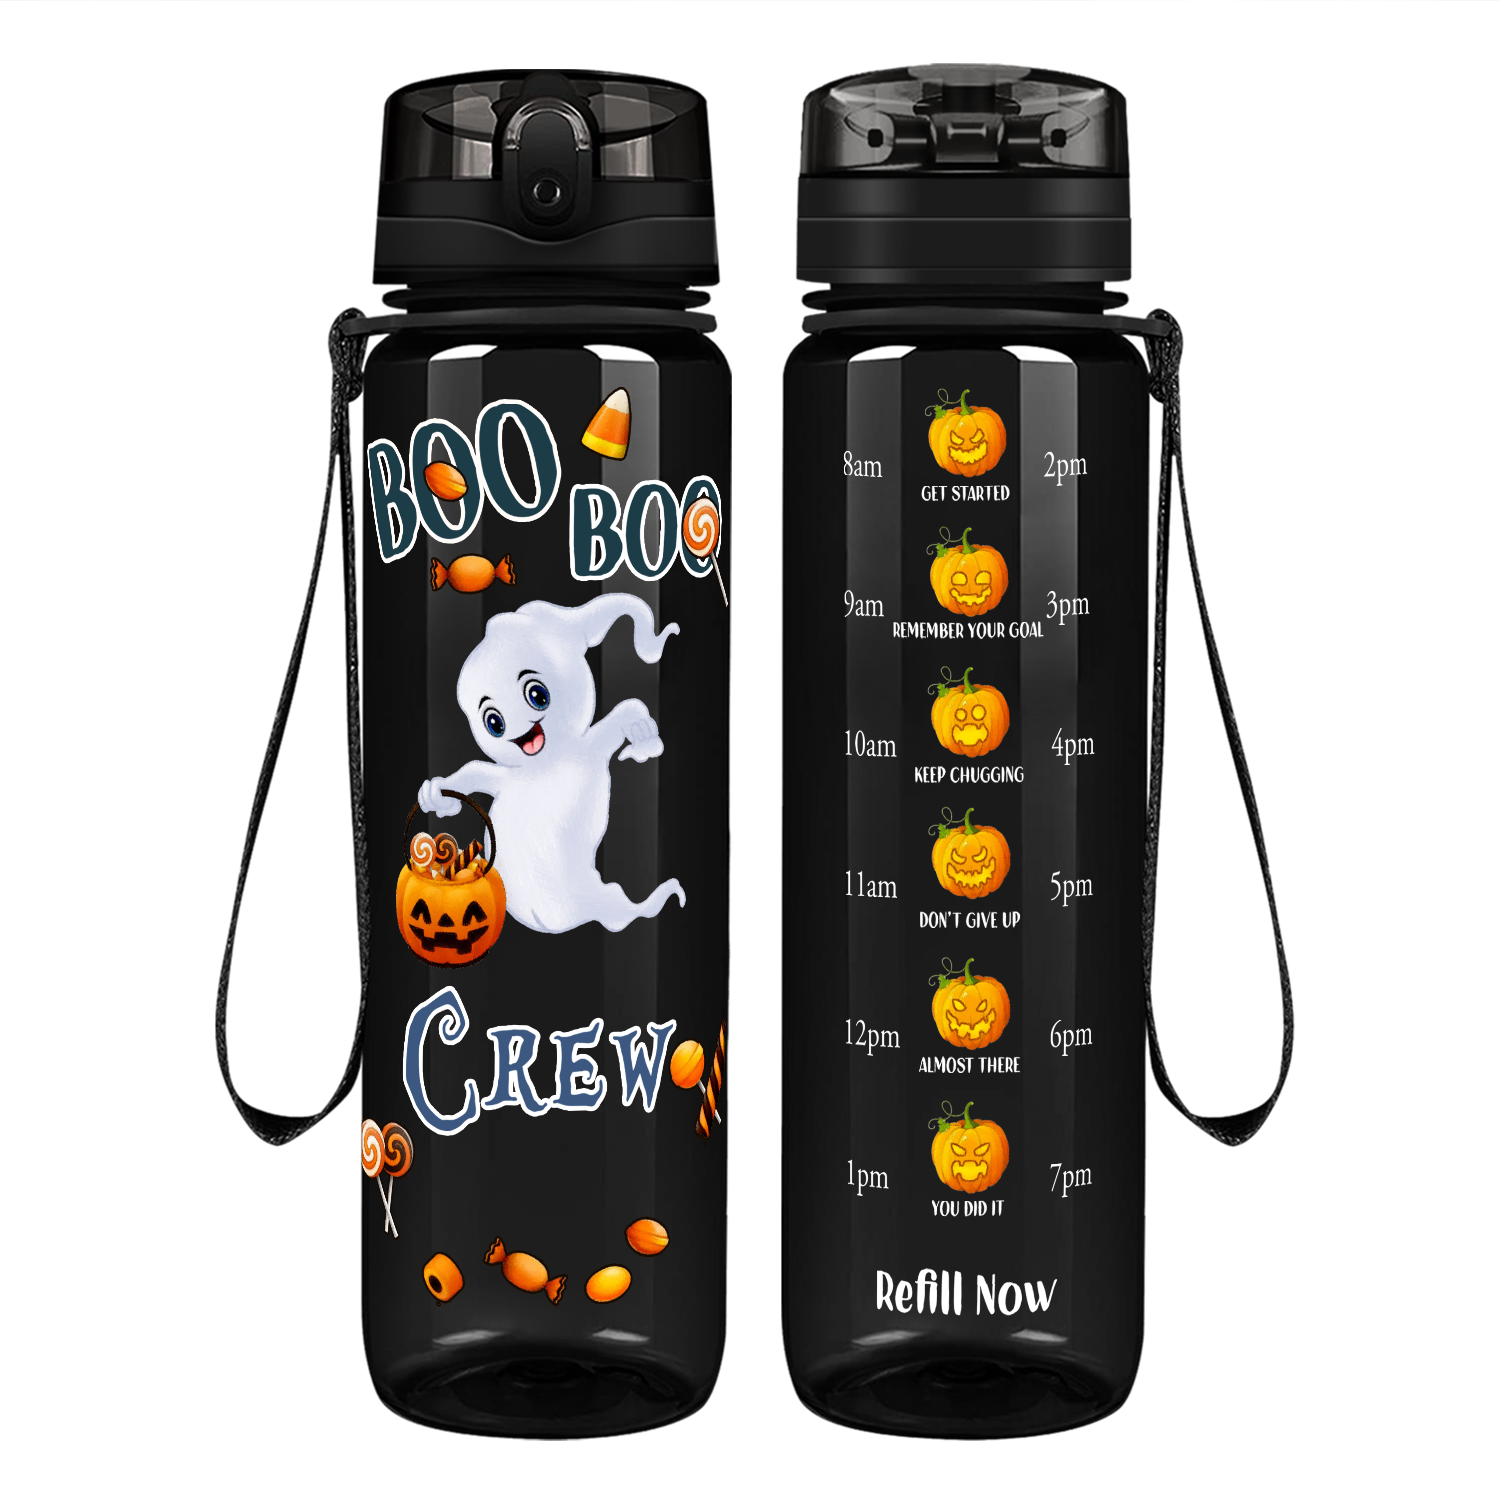 Boo Boo Crew on 32 oz Motivational Tracking Water Bottle